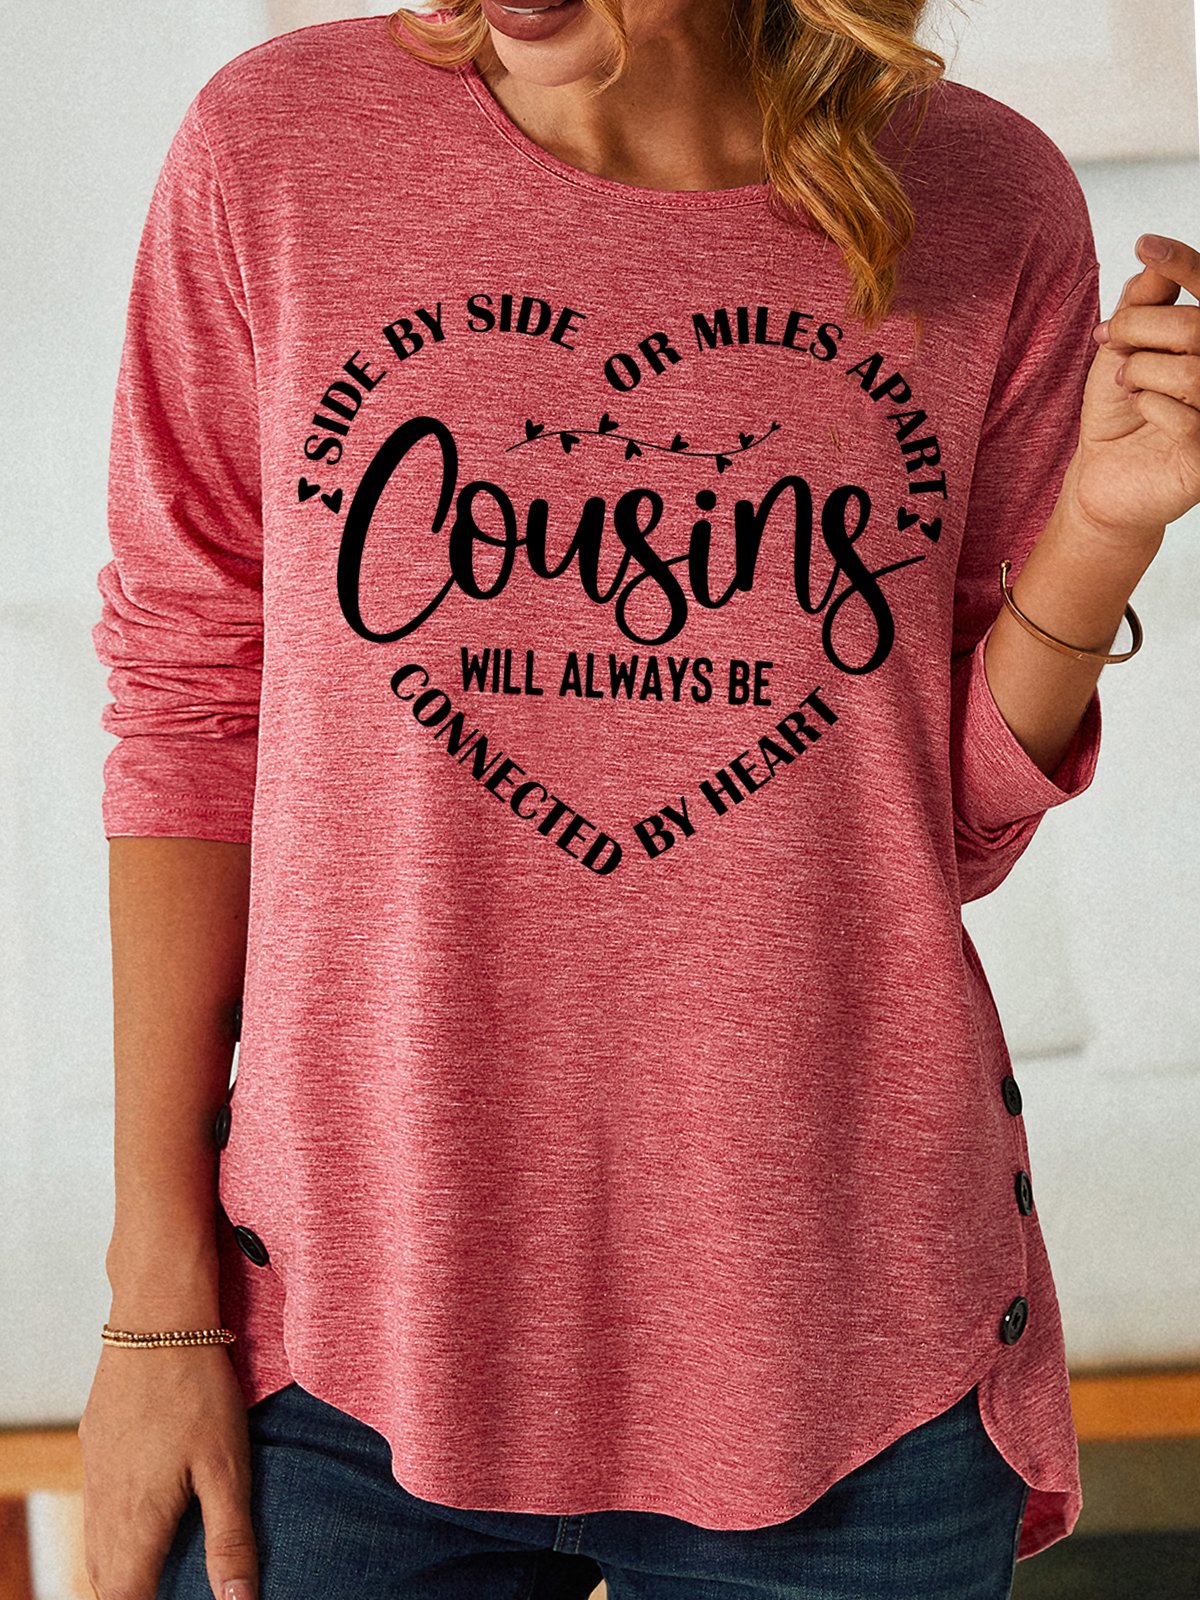 Women's Side by side or miles apart cousins connected by heart Crew Neck Long Sleeve Top